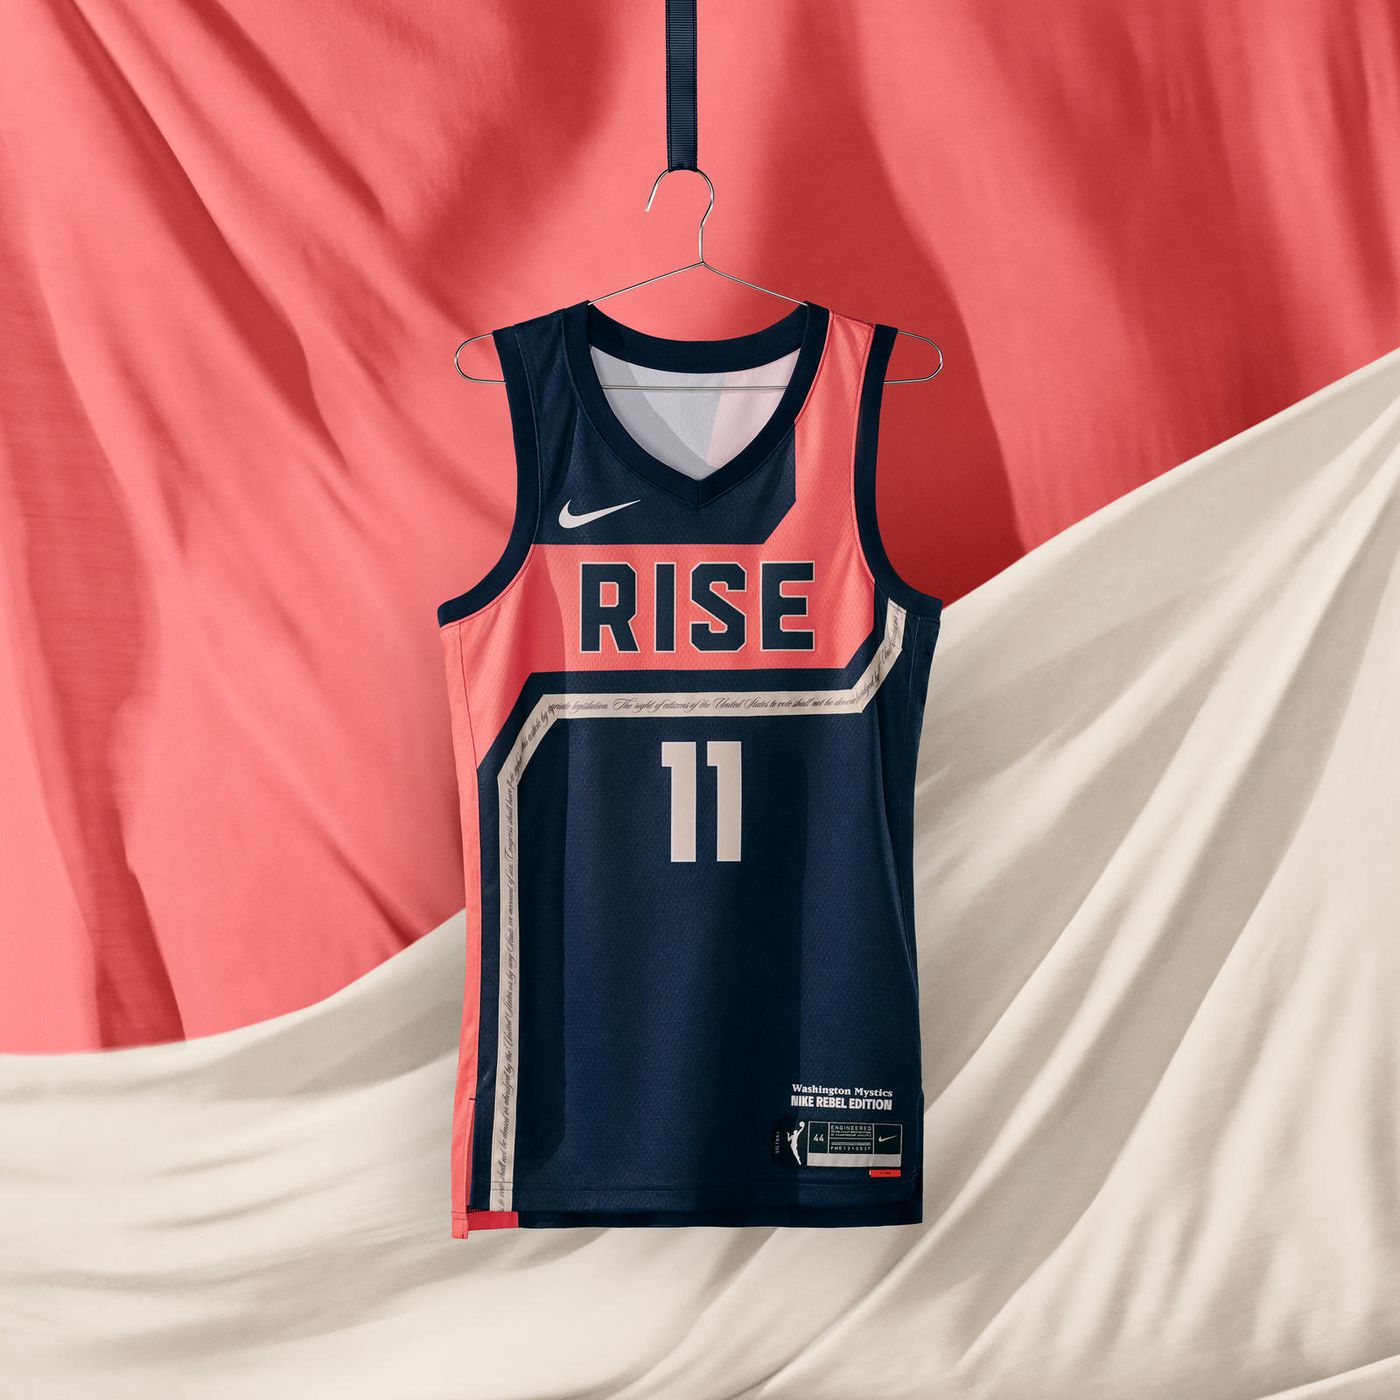 The WNBA released its best jerseys ever for the 2021 season 